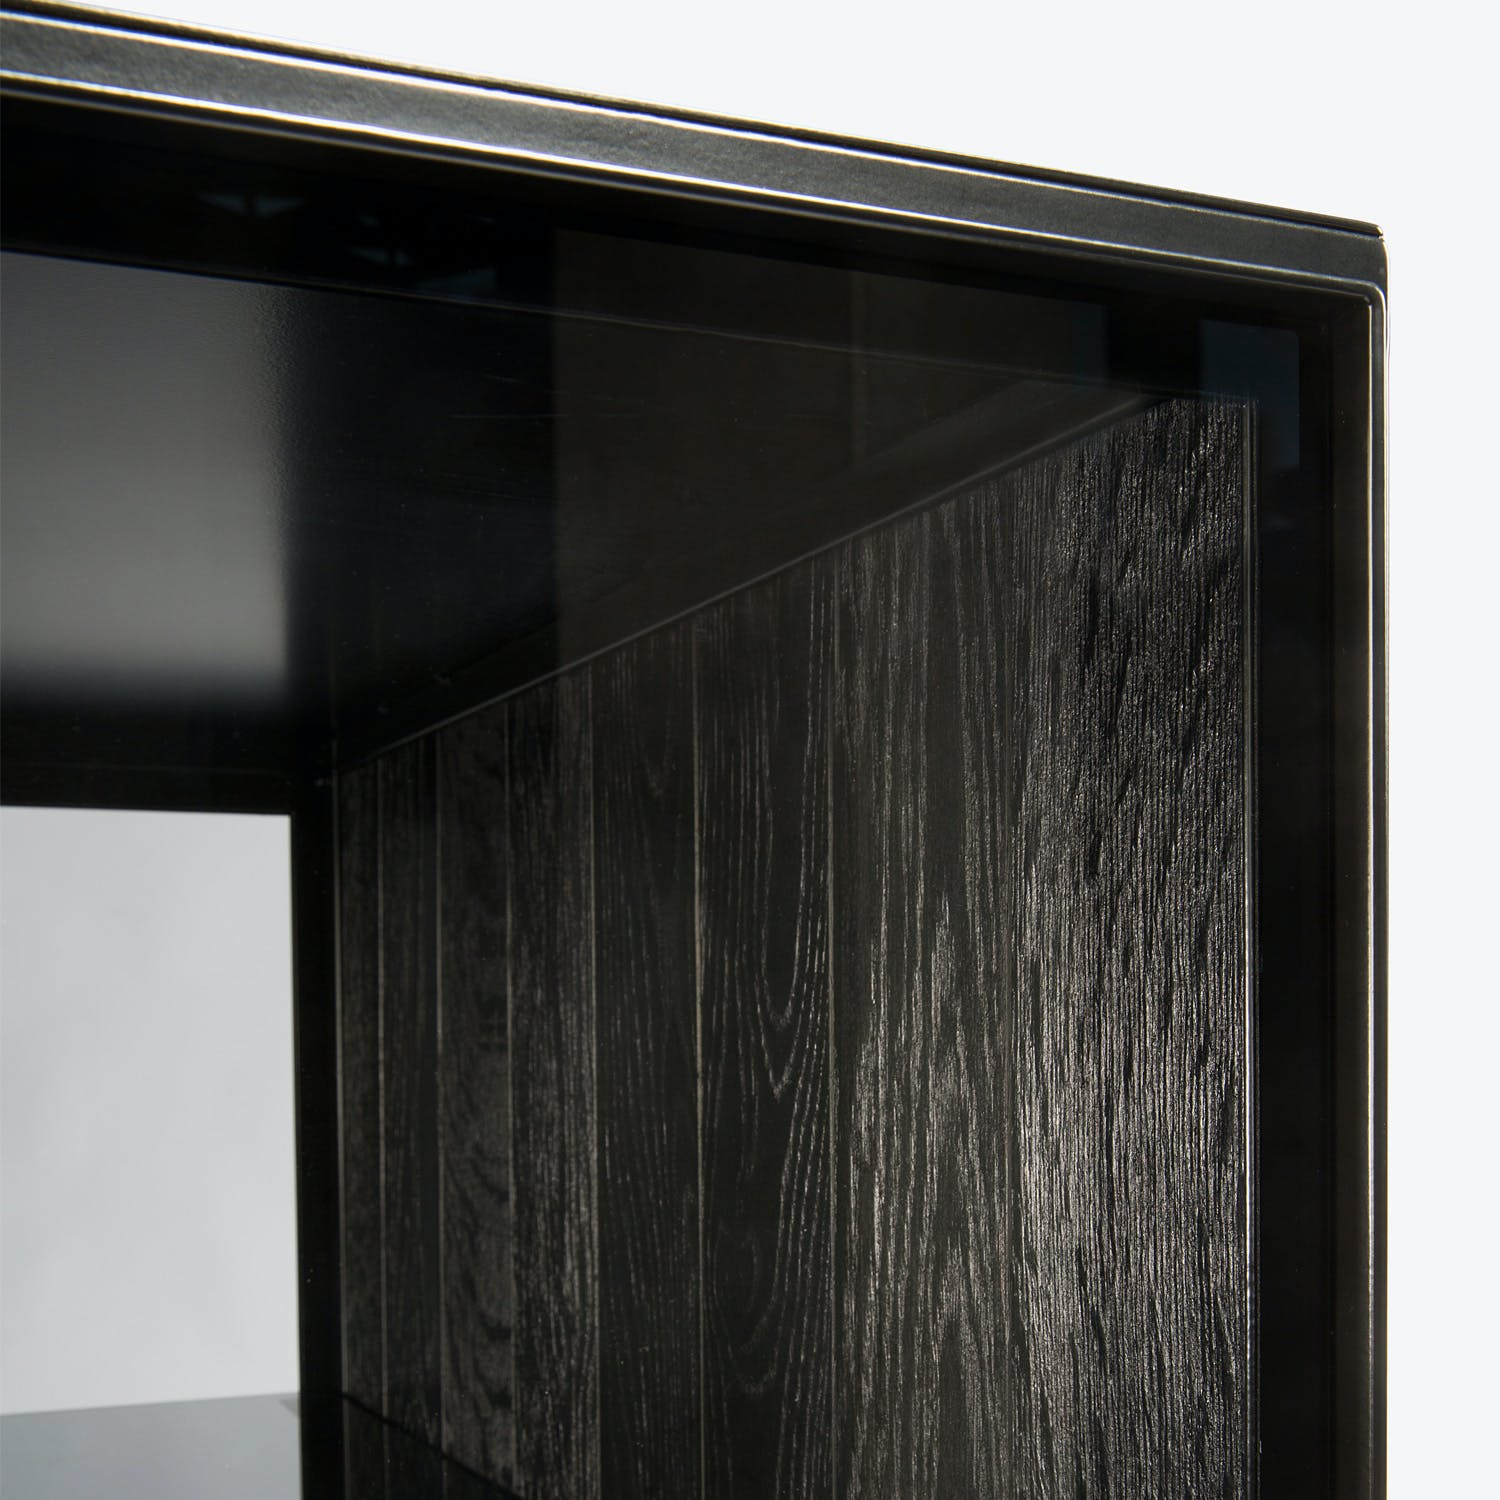 Close-up view of a black wooden frame with glass insert.